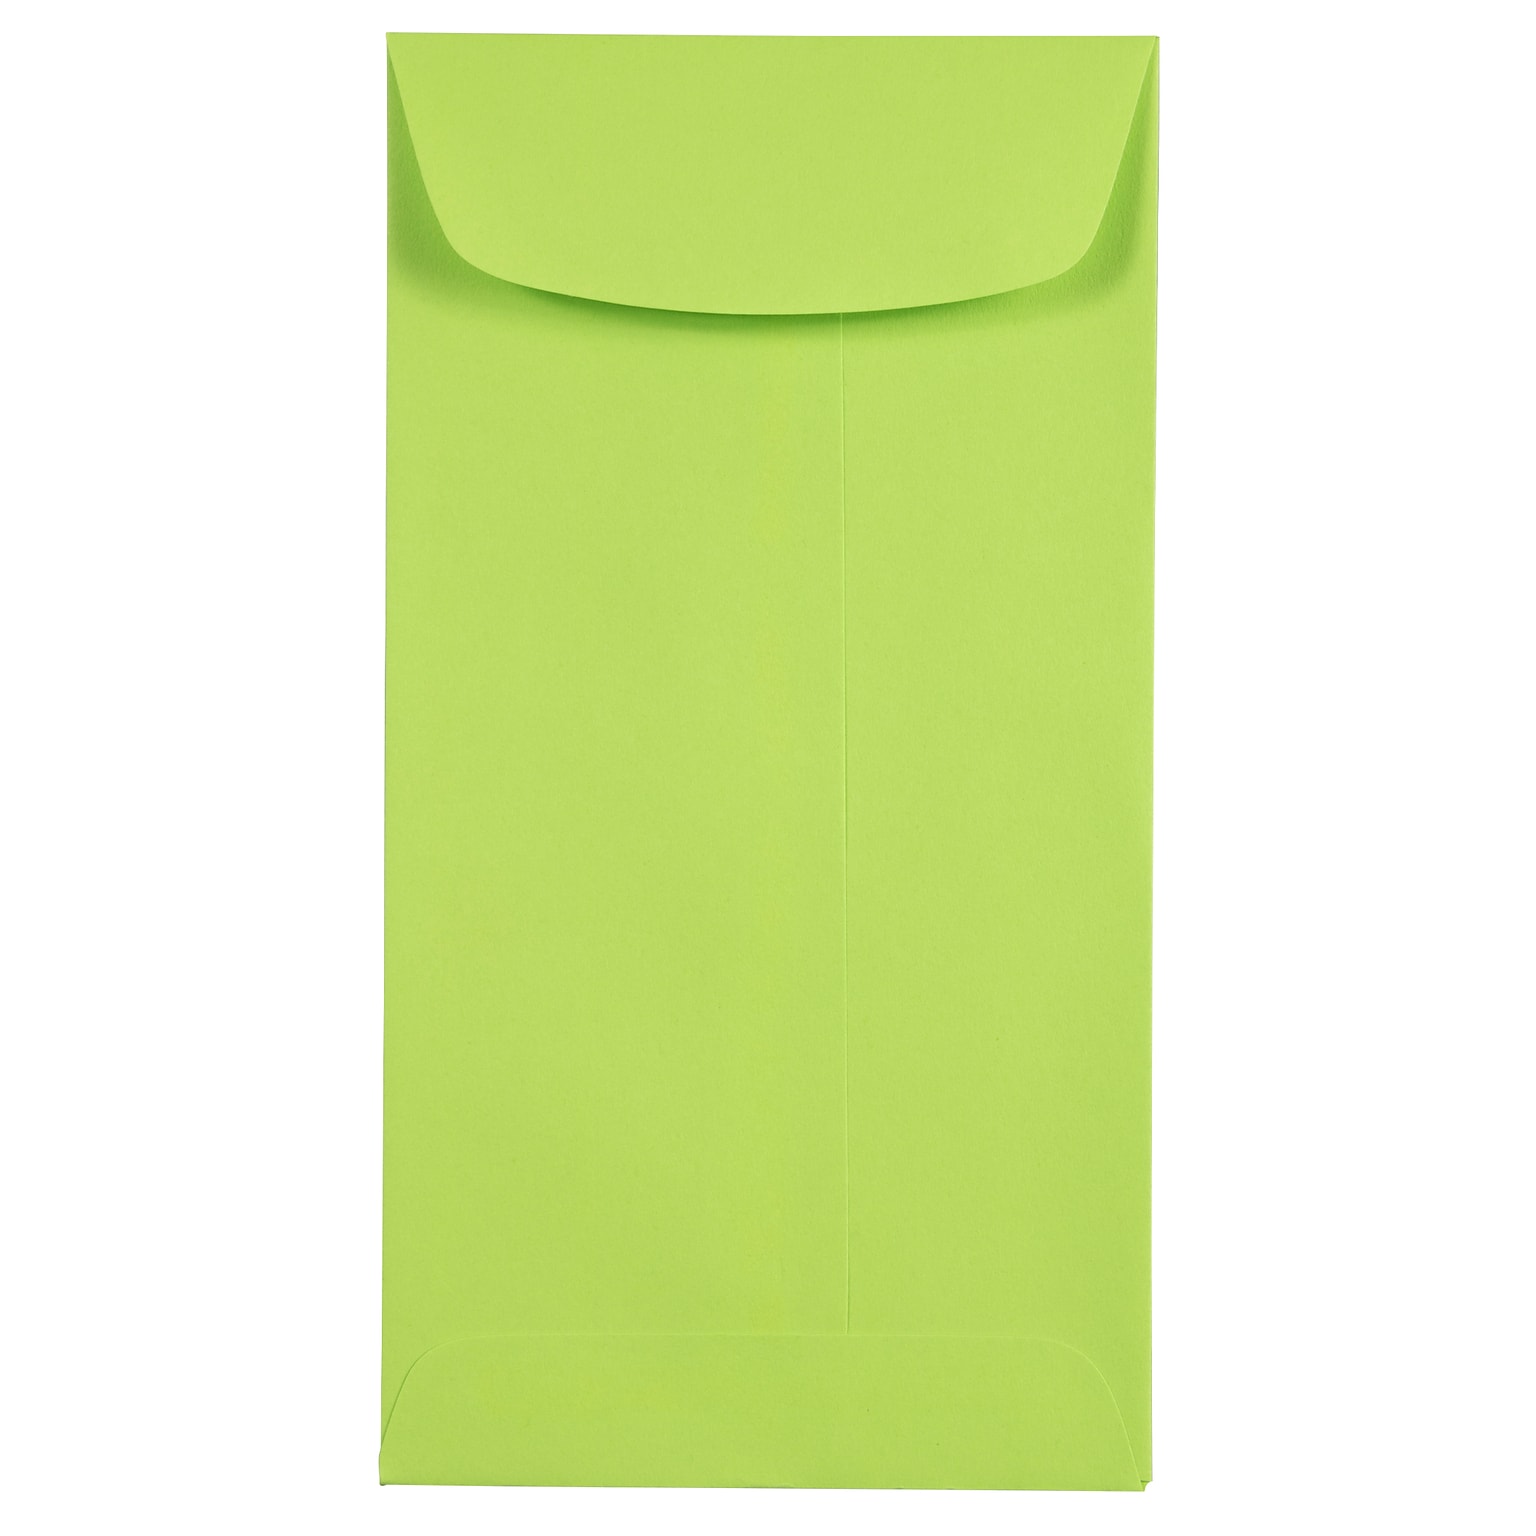 JAM Paper® #7 Coin Business Colored Envelopes, 3.5 x 6.5, Ultra Lime Green, 50/Pack (1526752I)